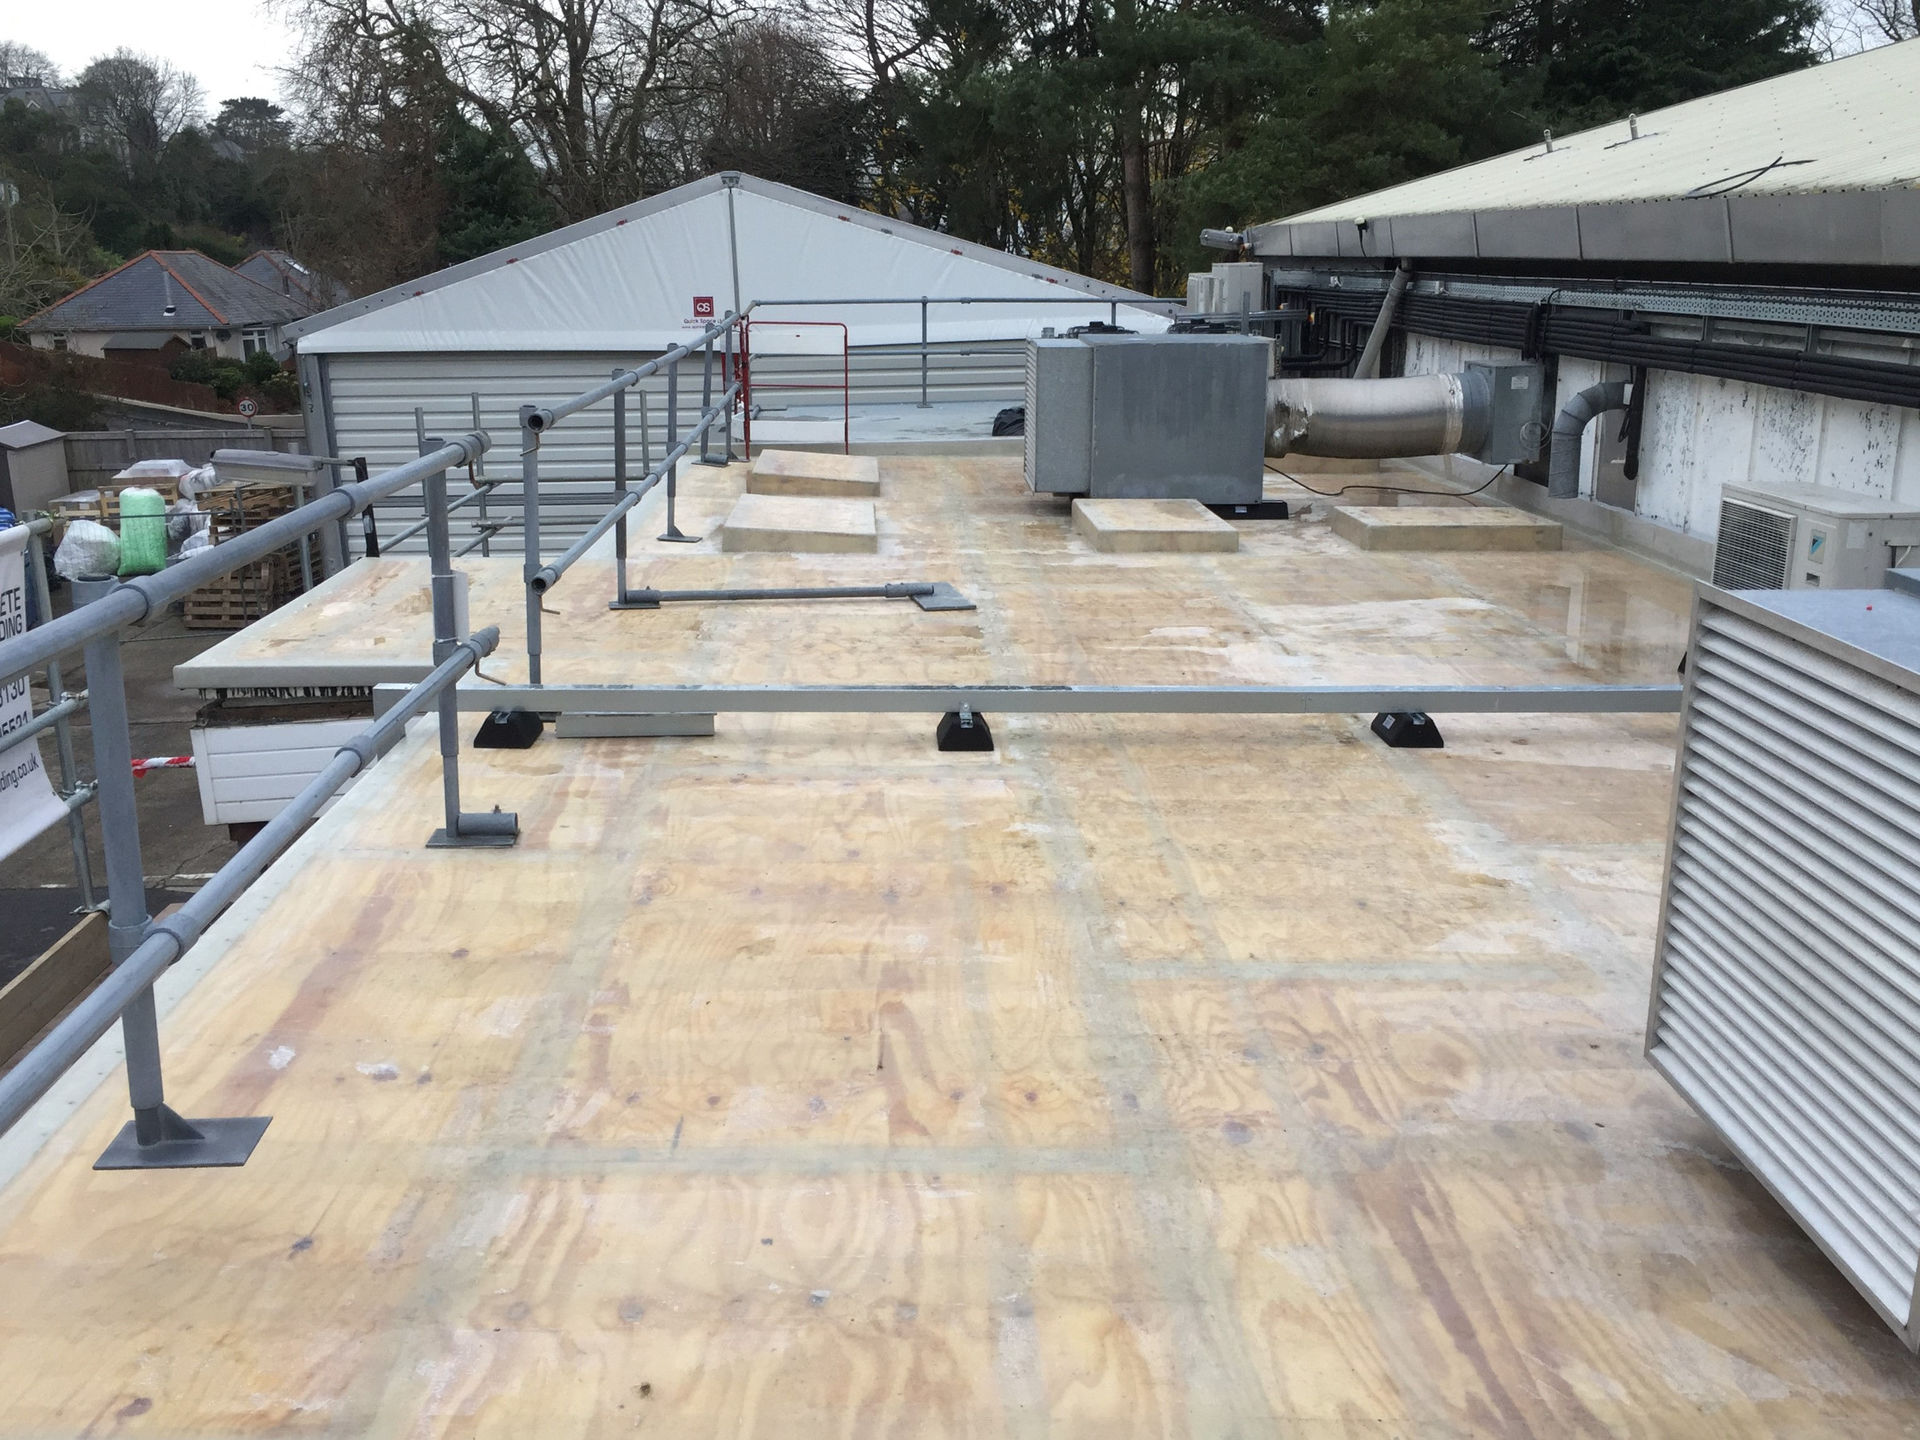 Safety measures put in place, a Key clamp hand rail installed around the outside to prevent falling, also a scaffolding crash deck in North Devon.